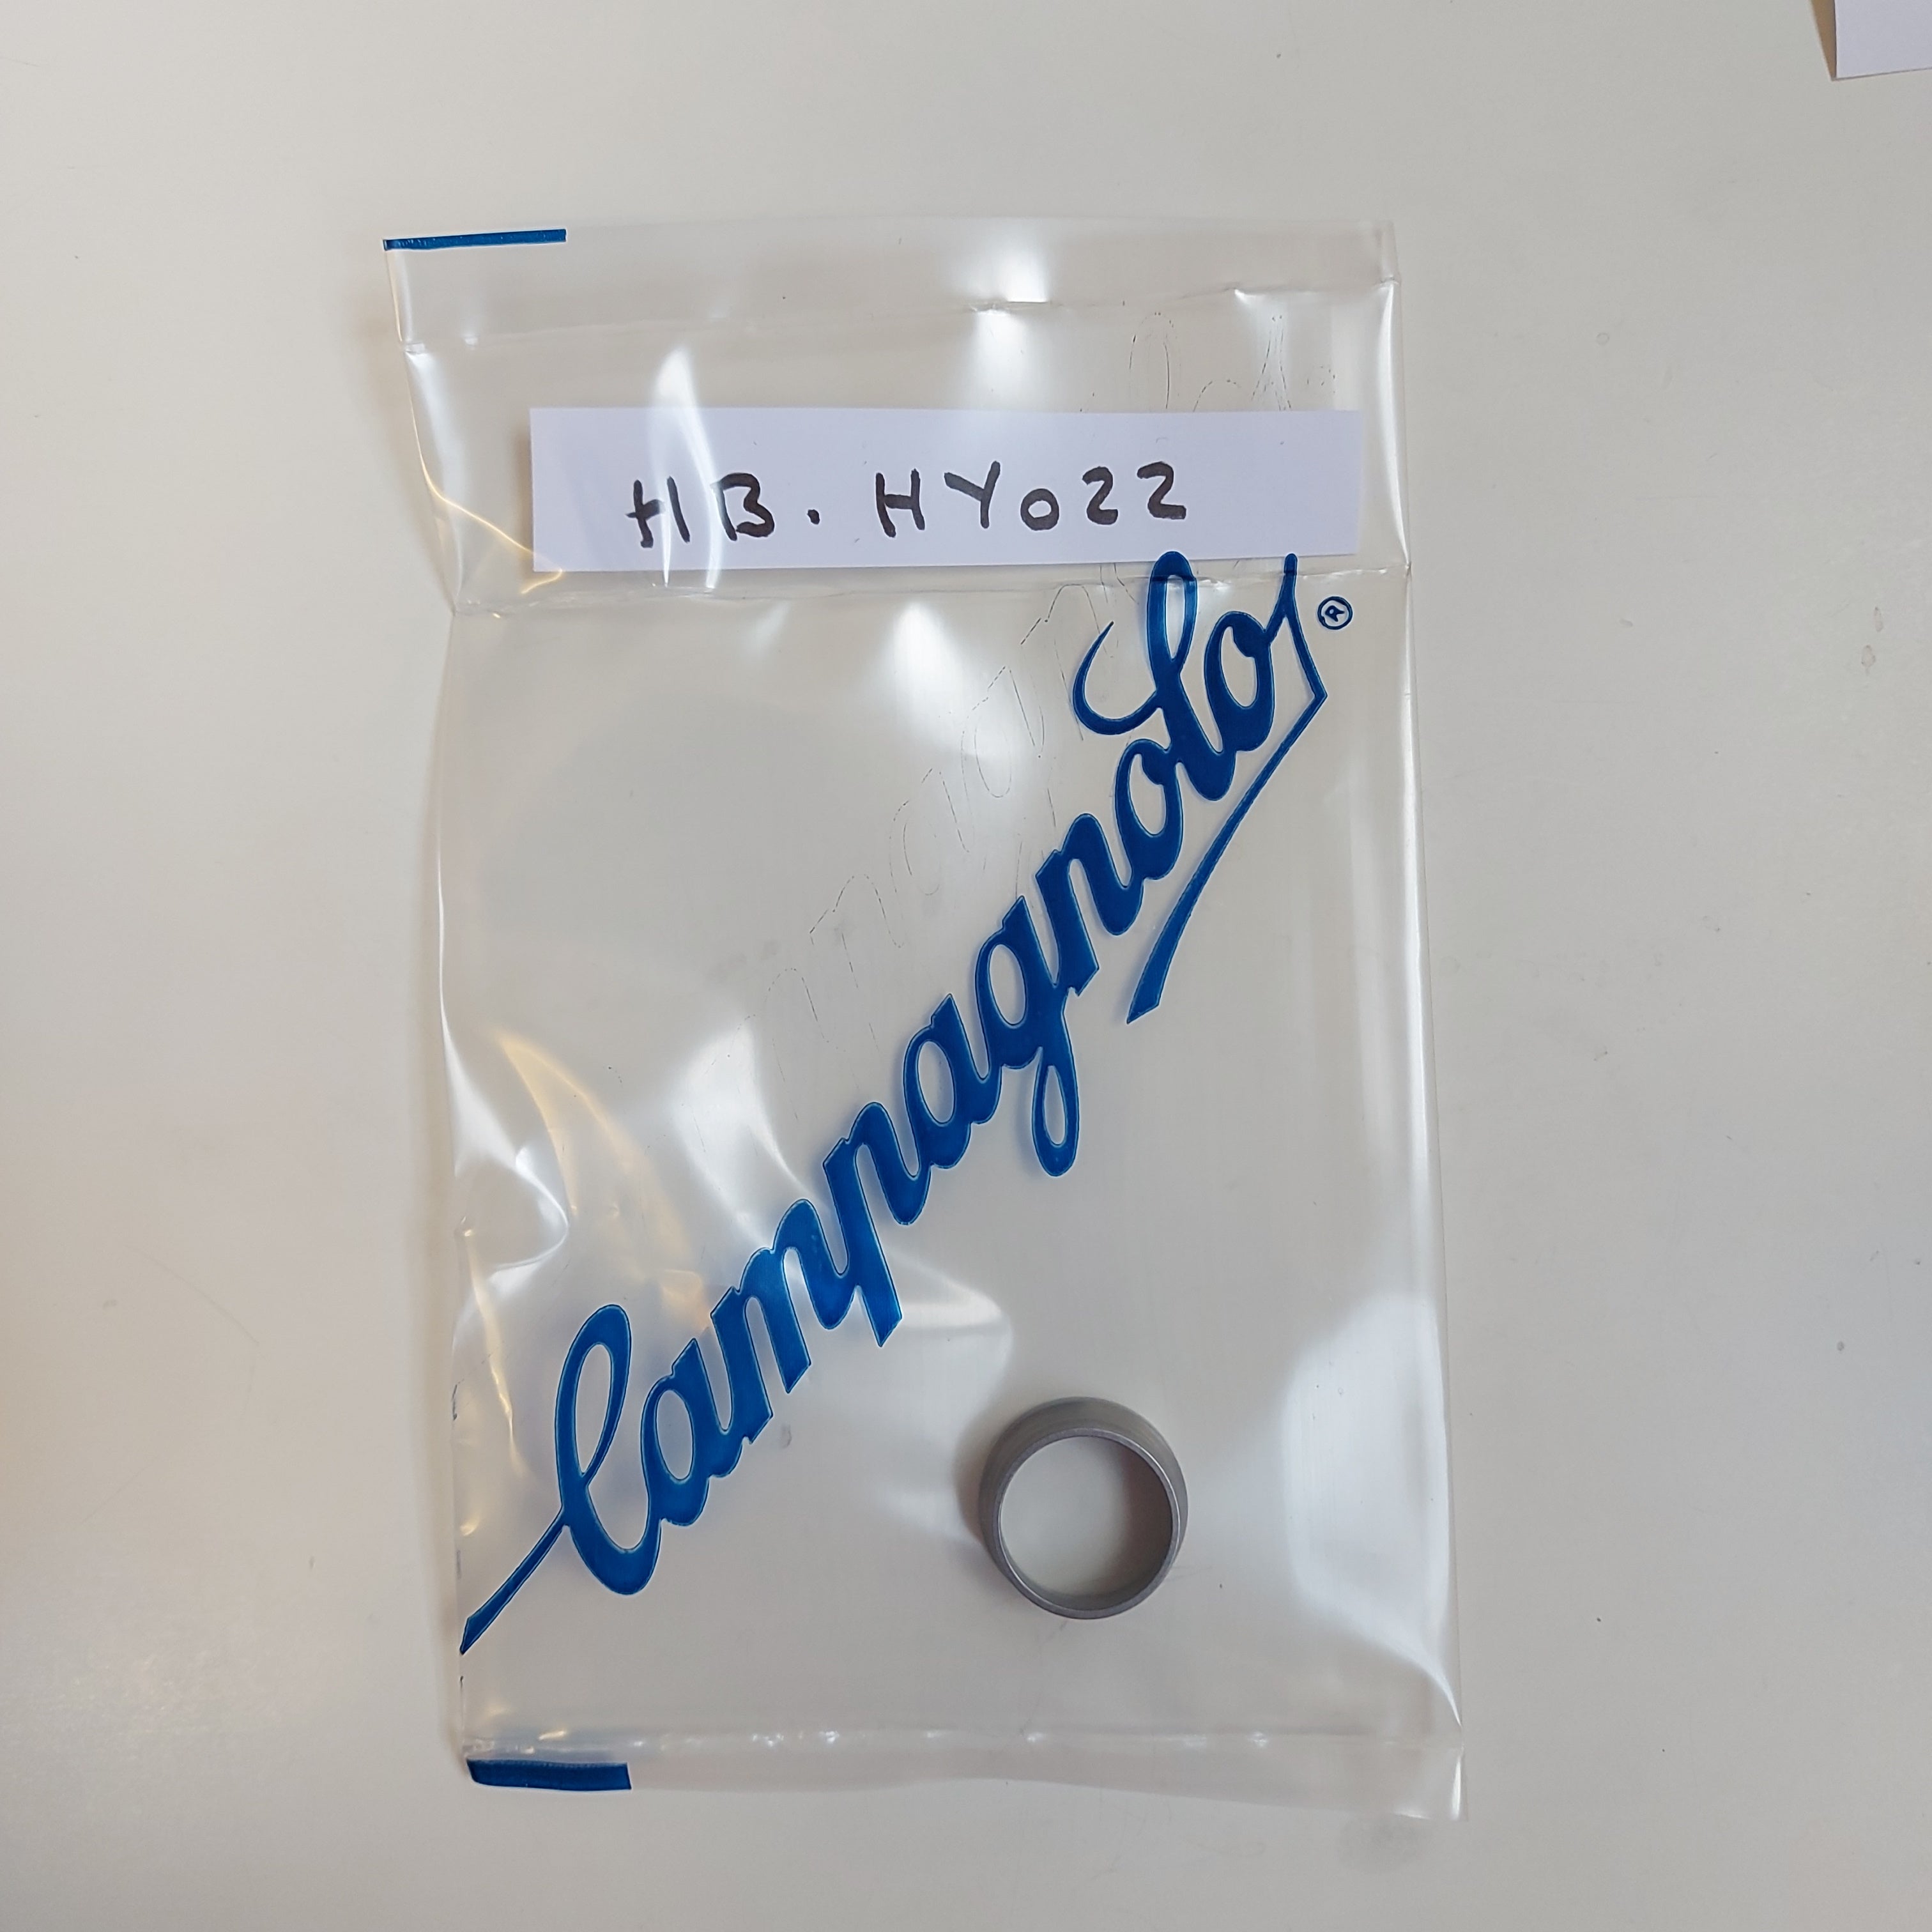 Campagnolo HB-HY022 Hub Cone for CULT